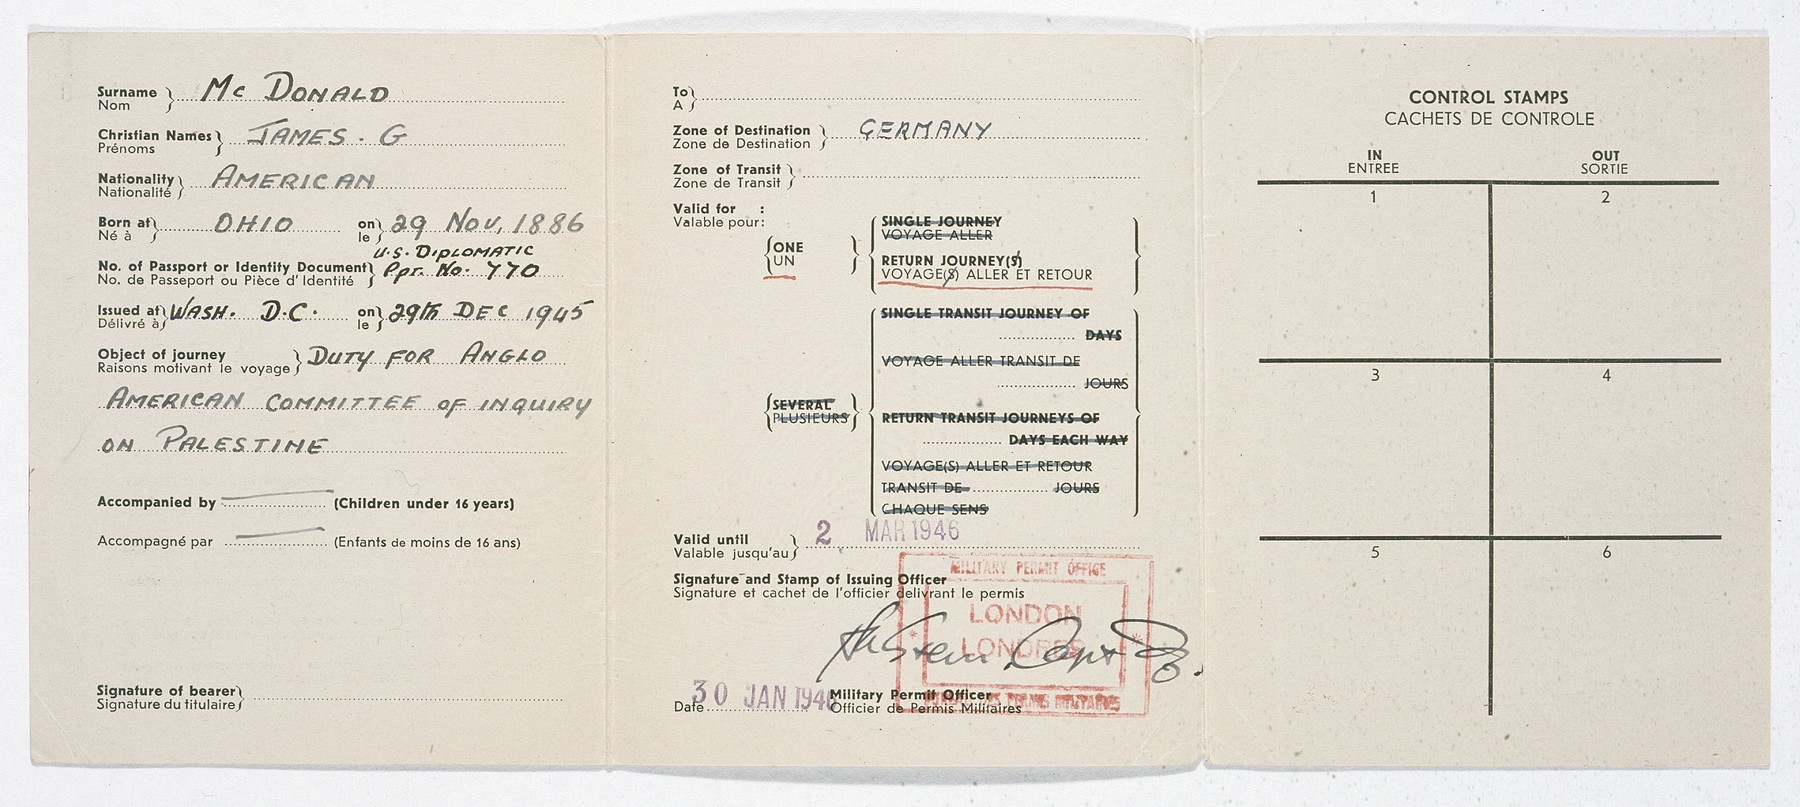 Interior pages of a military entry permit issued to James G. McDonald giving him permission to travel freely throughout Germany as a member of the Anglo-American Committee of Inquiry on Palestine.